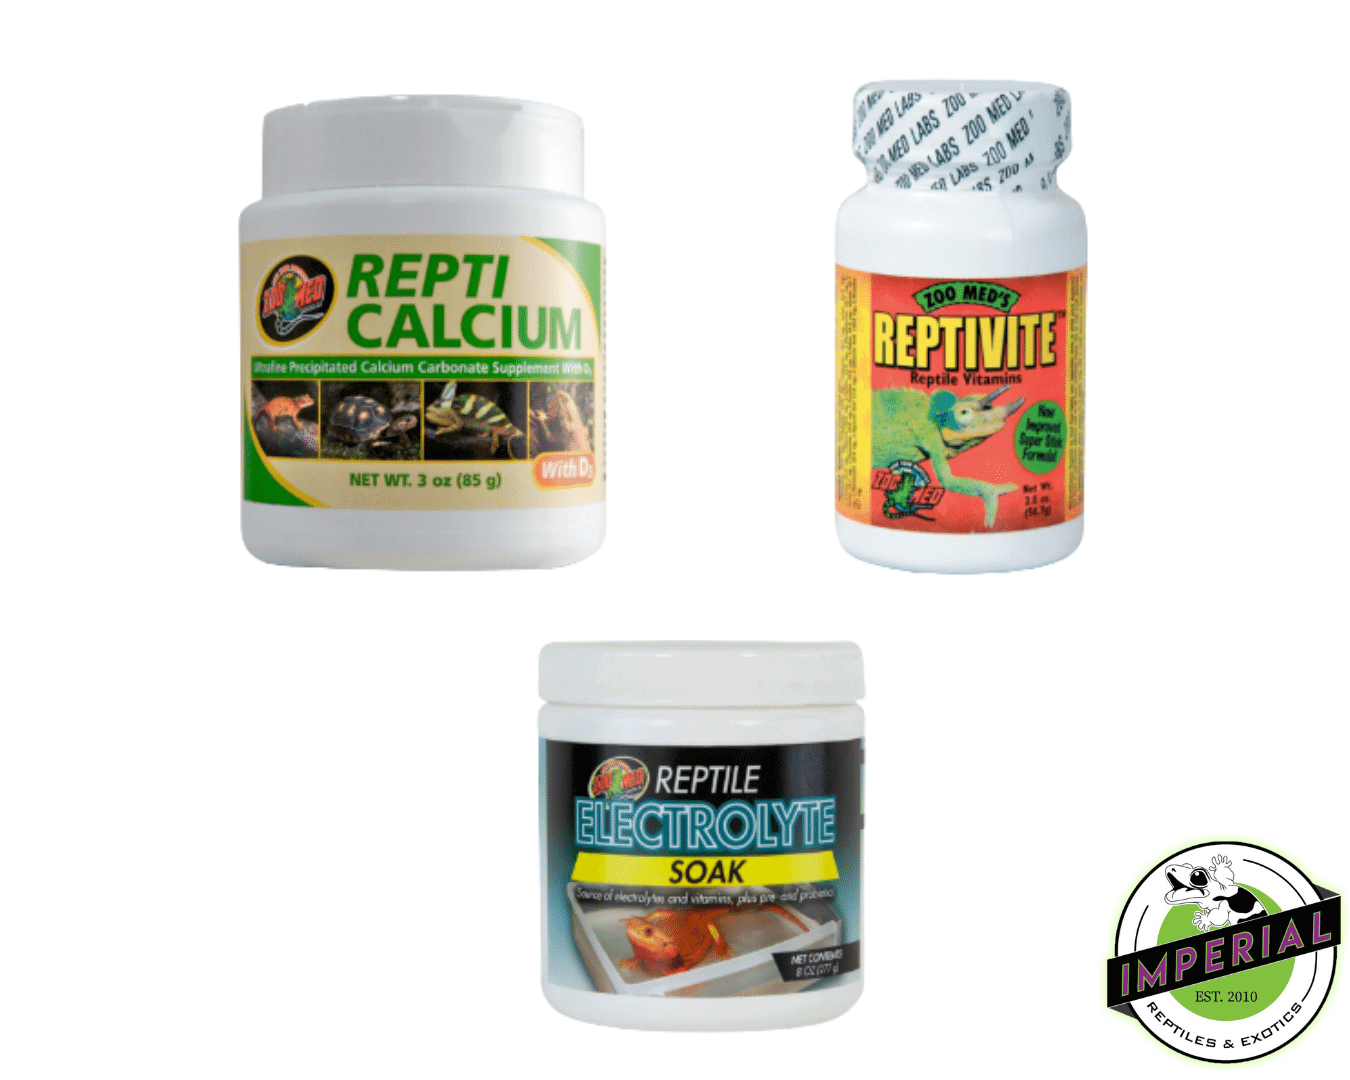 reptile supplement kit for sale online at cheap prices. Reptile calcium, multivitamin, and electrolyte soak.